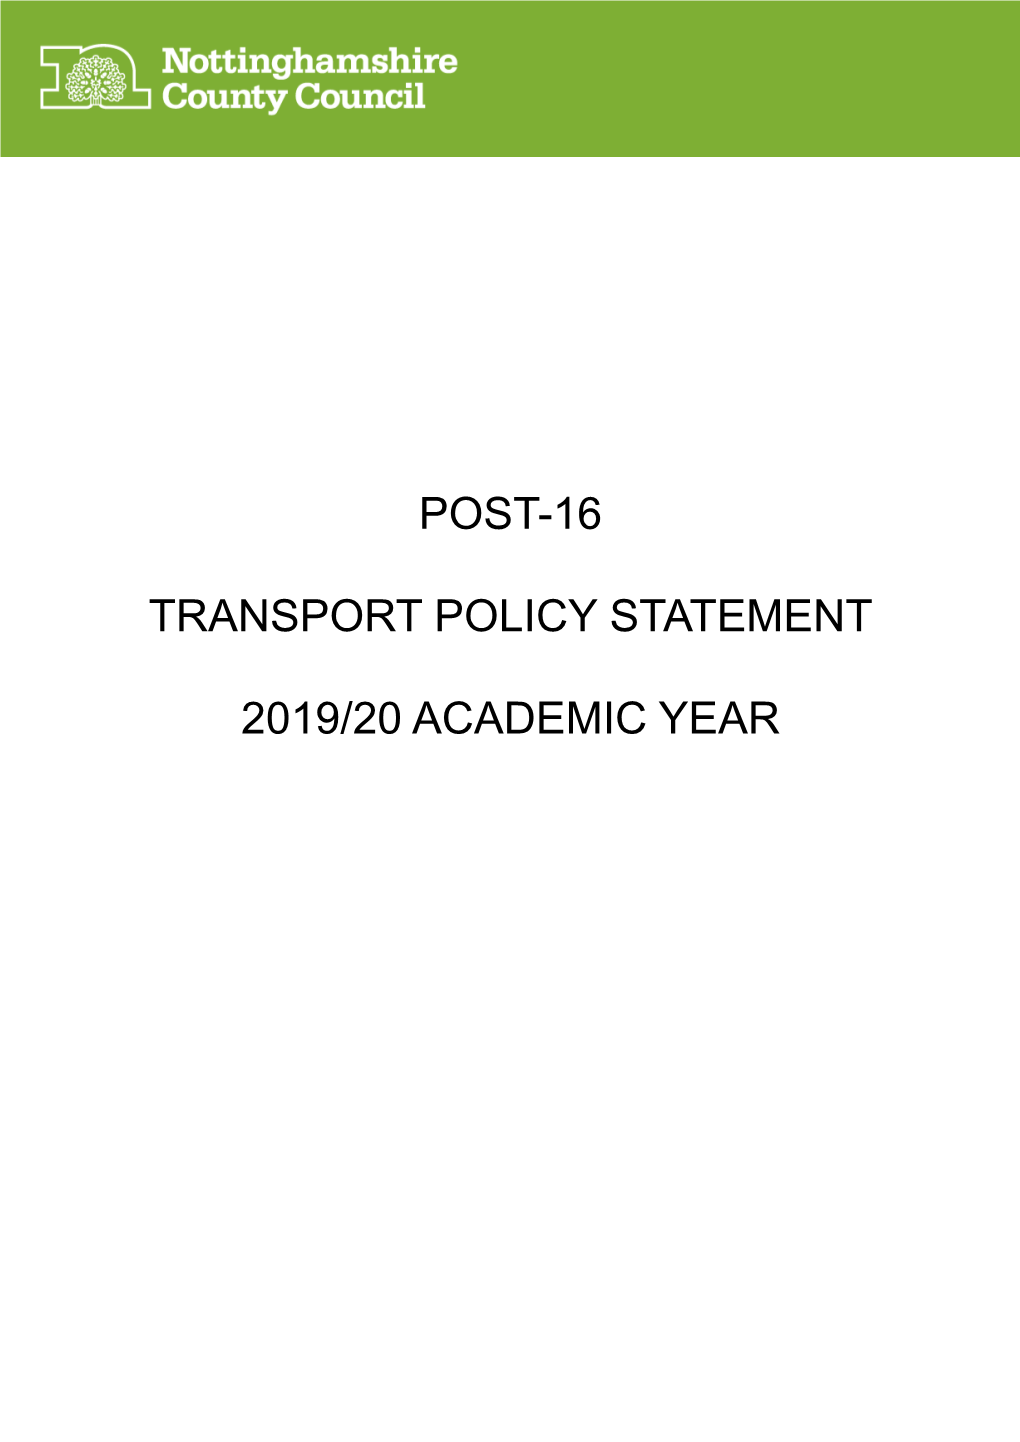 Post 16 Transport Policy Statement 2019